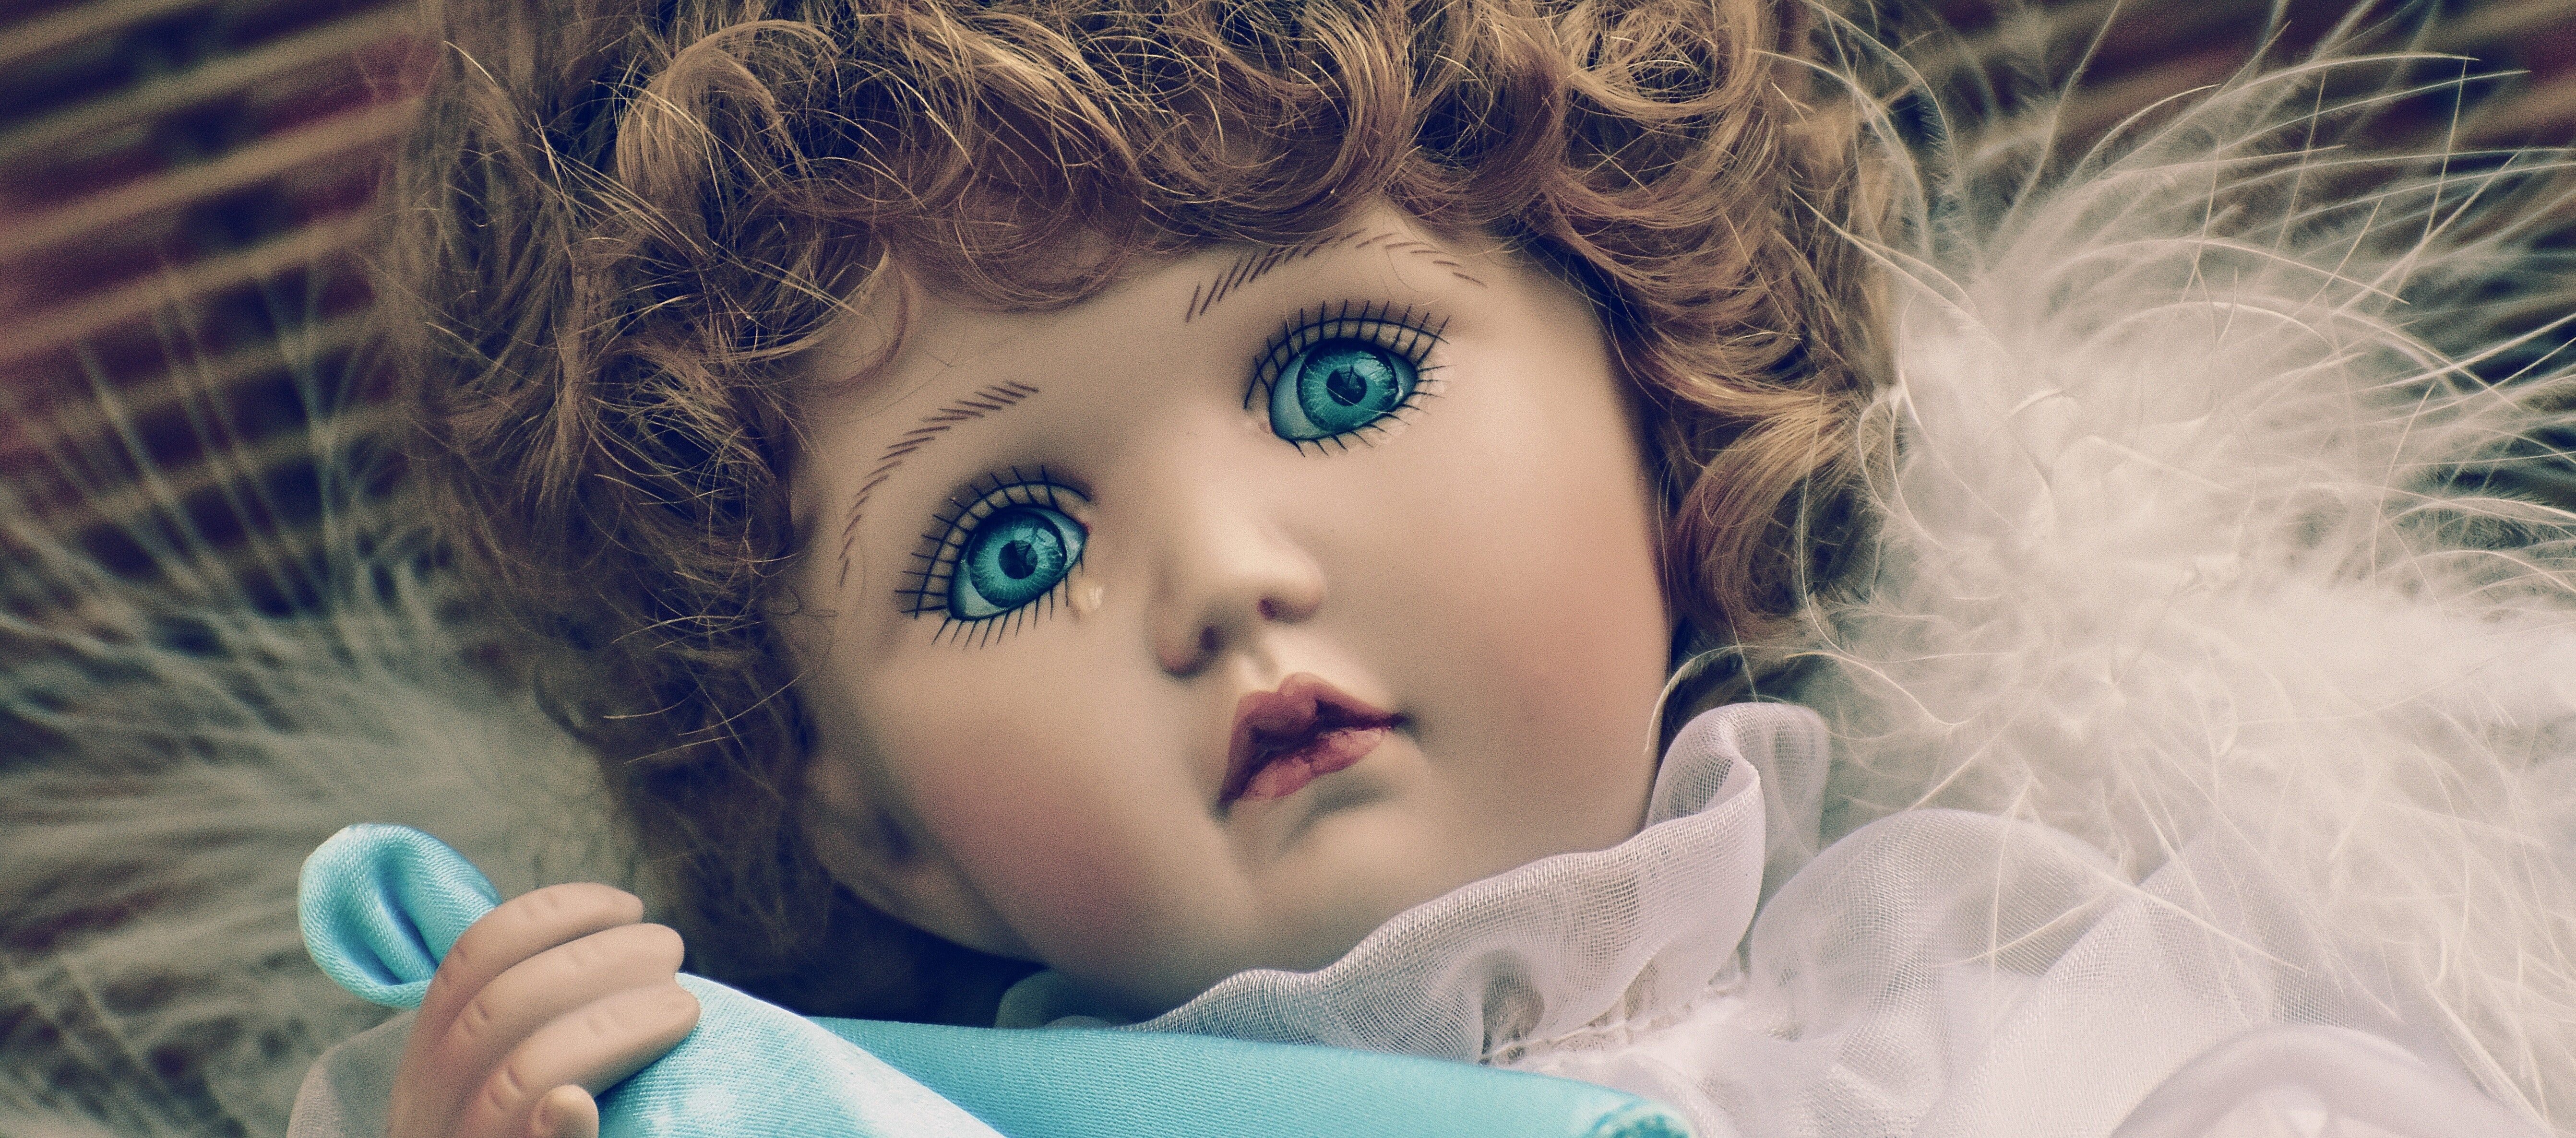 Brown haired female doll photo